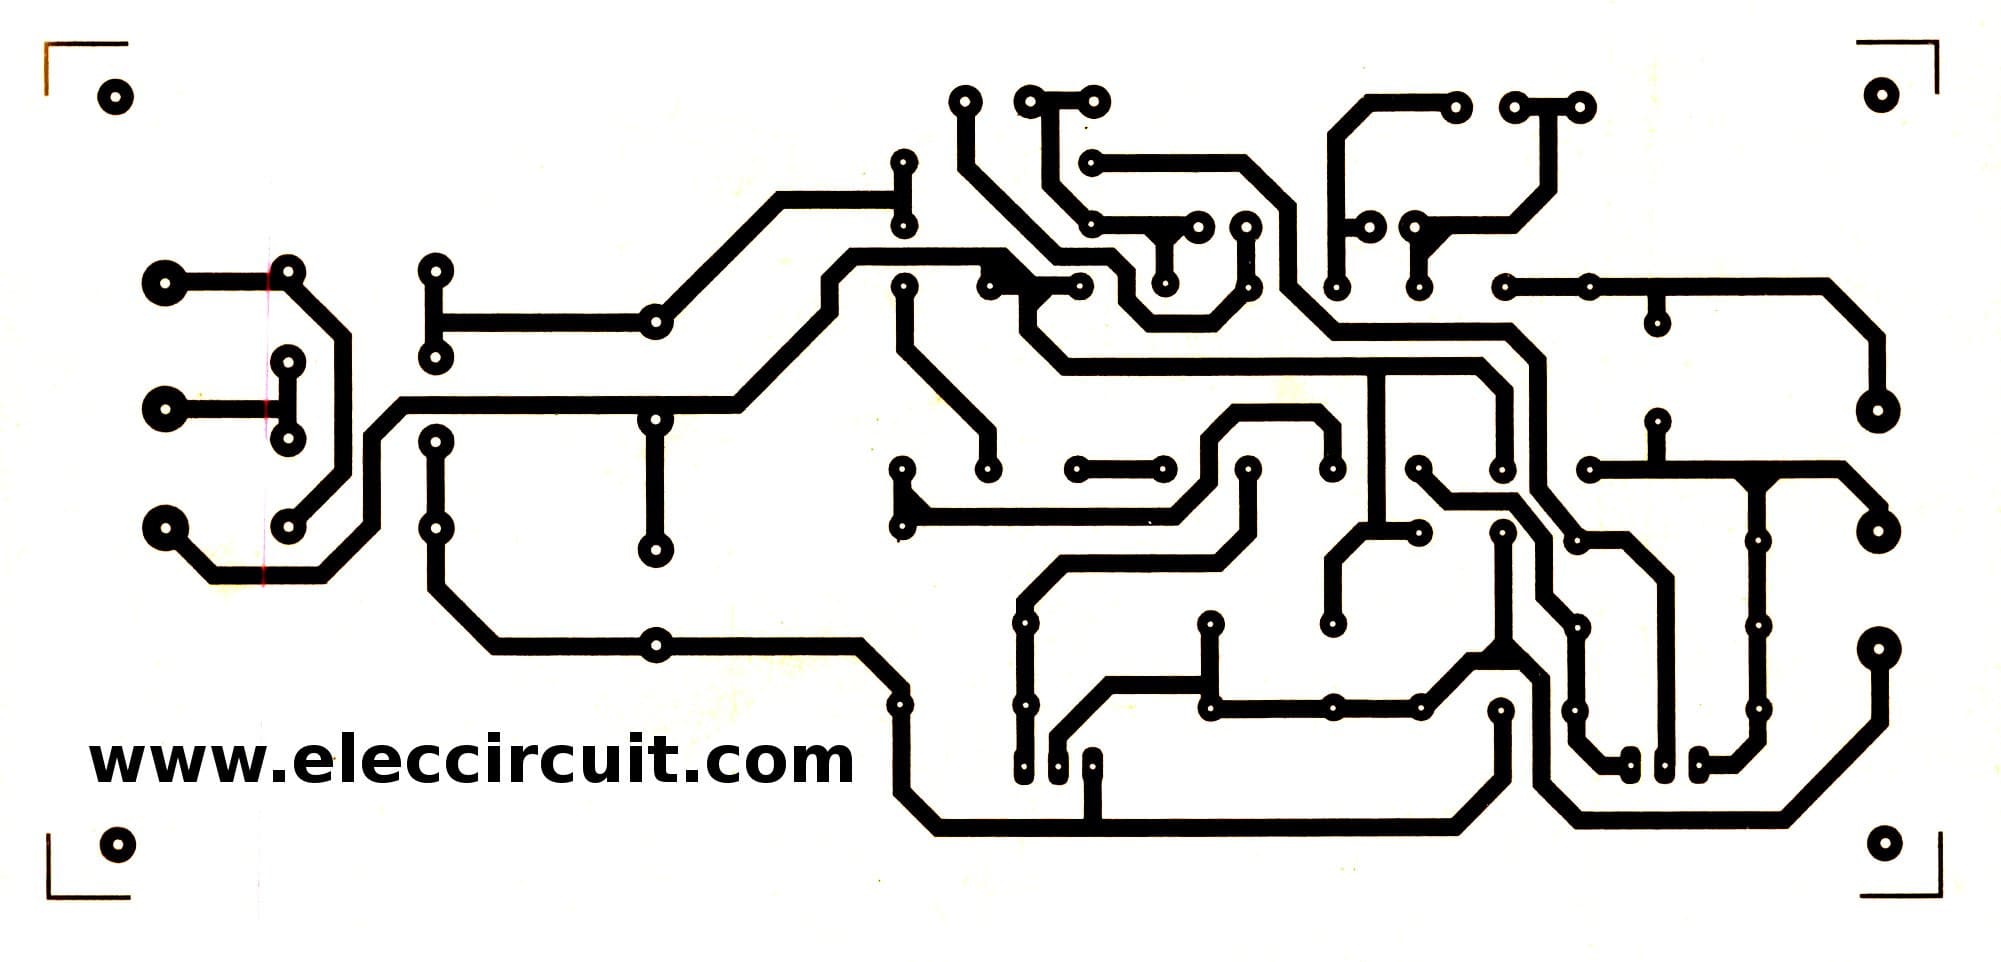 pcb layout of 0 60 volt dc variable power supply using lm317lm0337